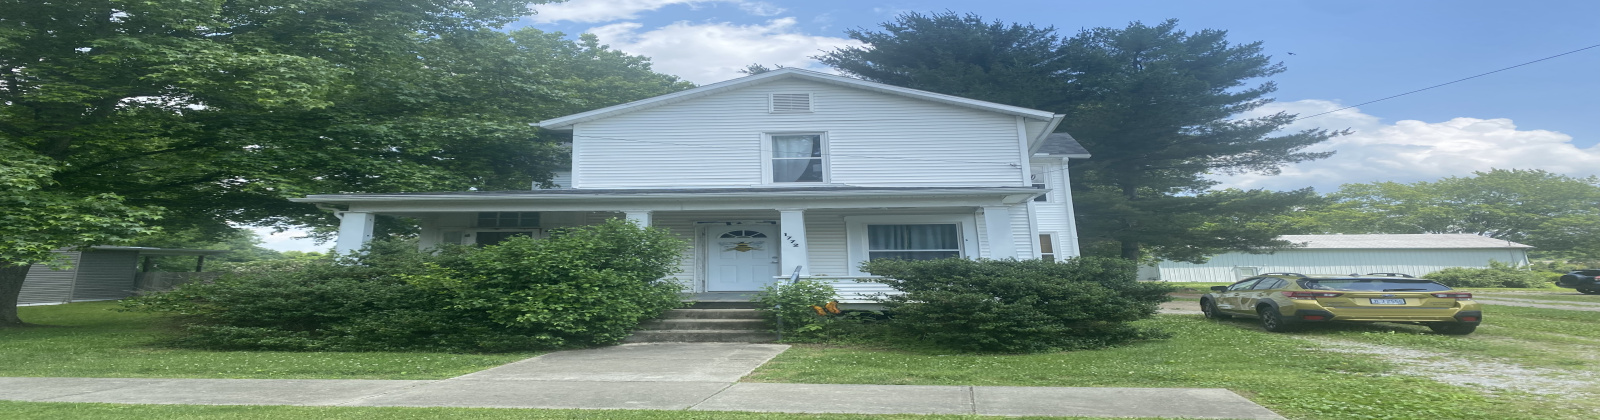 1772 Hill Avenue Albany, Ohio 45710, 3 Bedrooms Bedrooms, ,1 BathroomBathrooms,Apartment,For Rent,Hill,1120